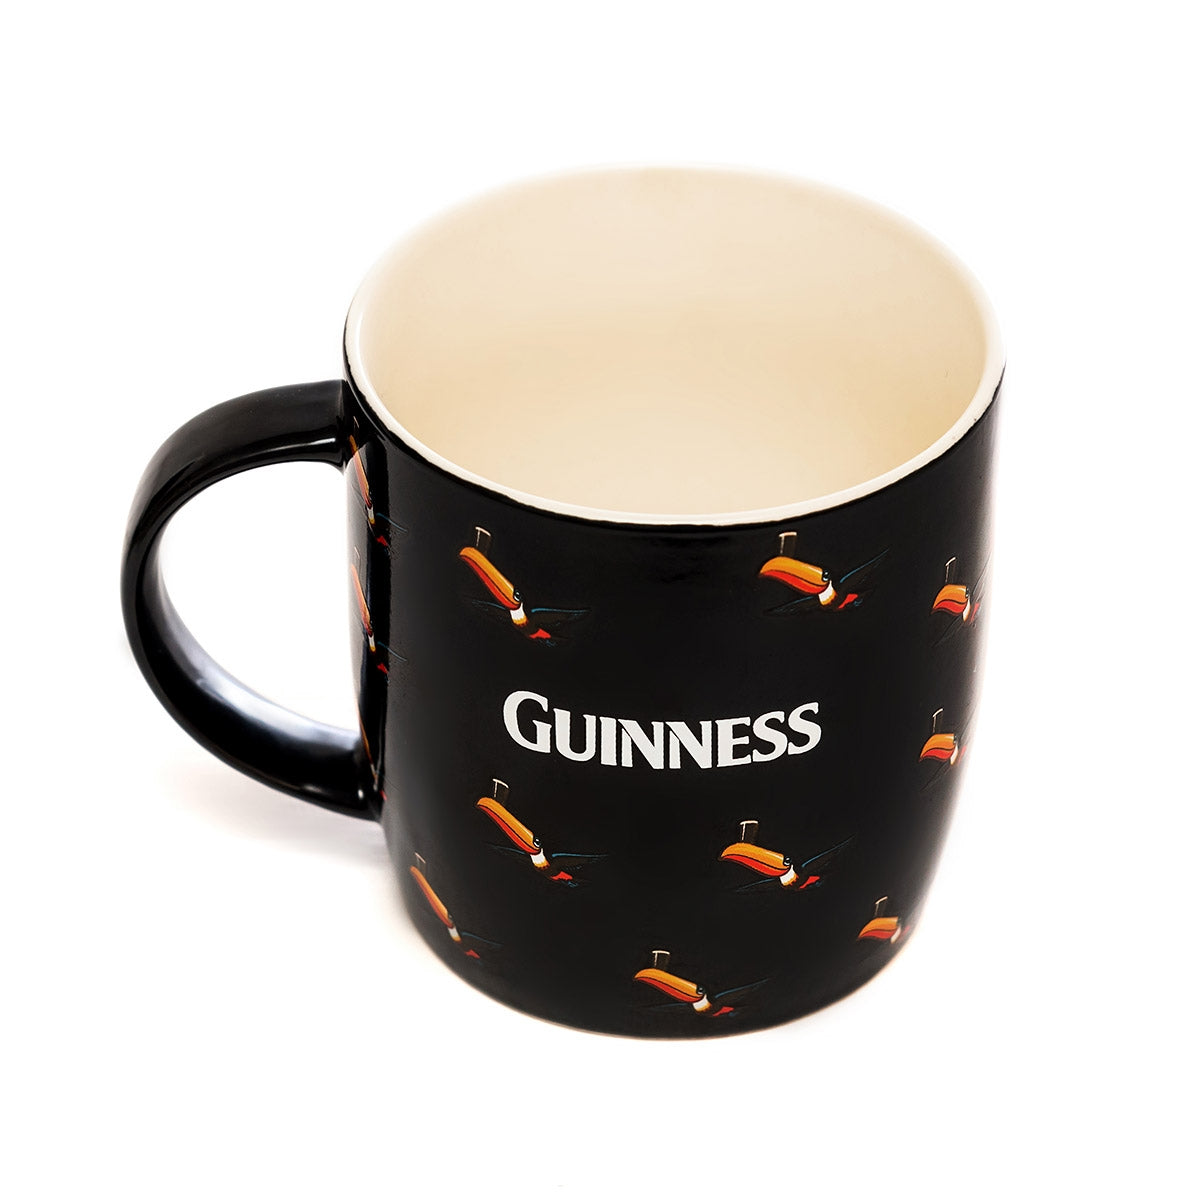 A black Guinness mug with orange fish on it has been replaced with a Guinness Black Mug with Multiple Flying Toucans.